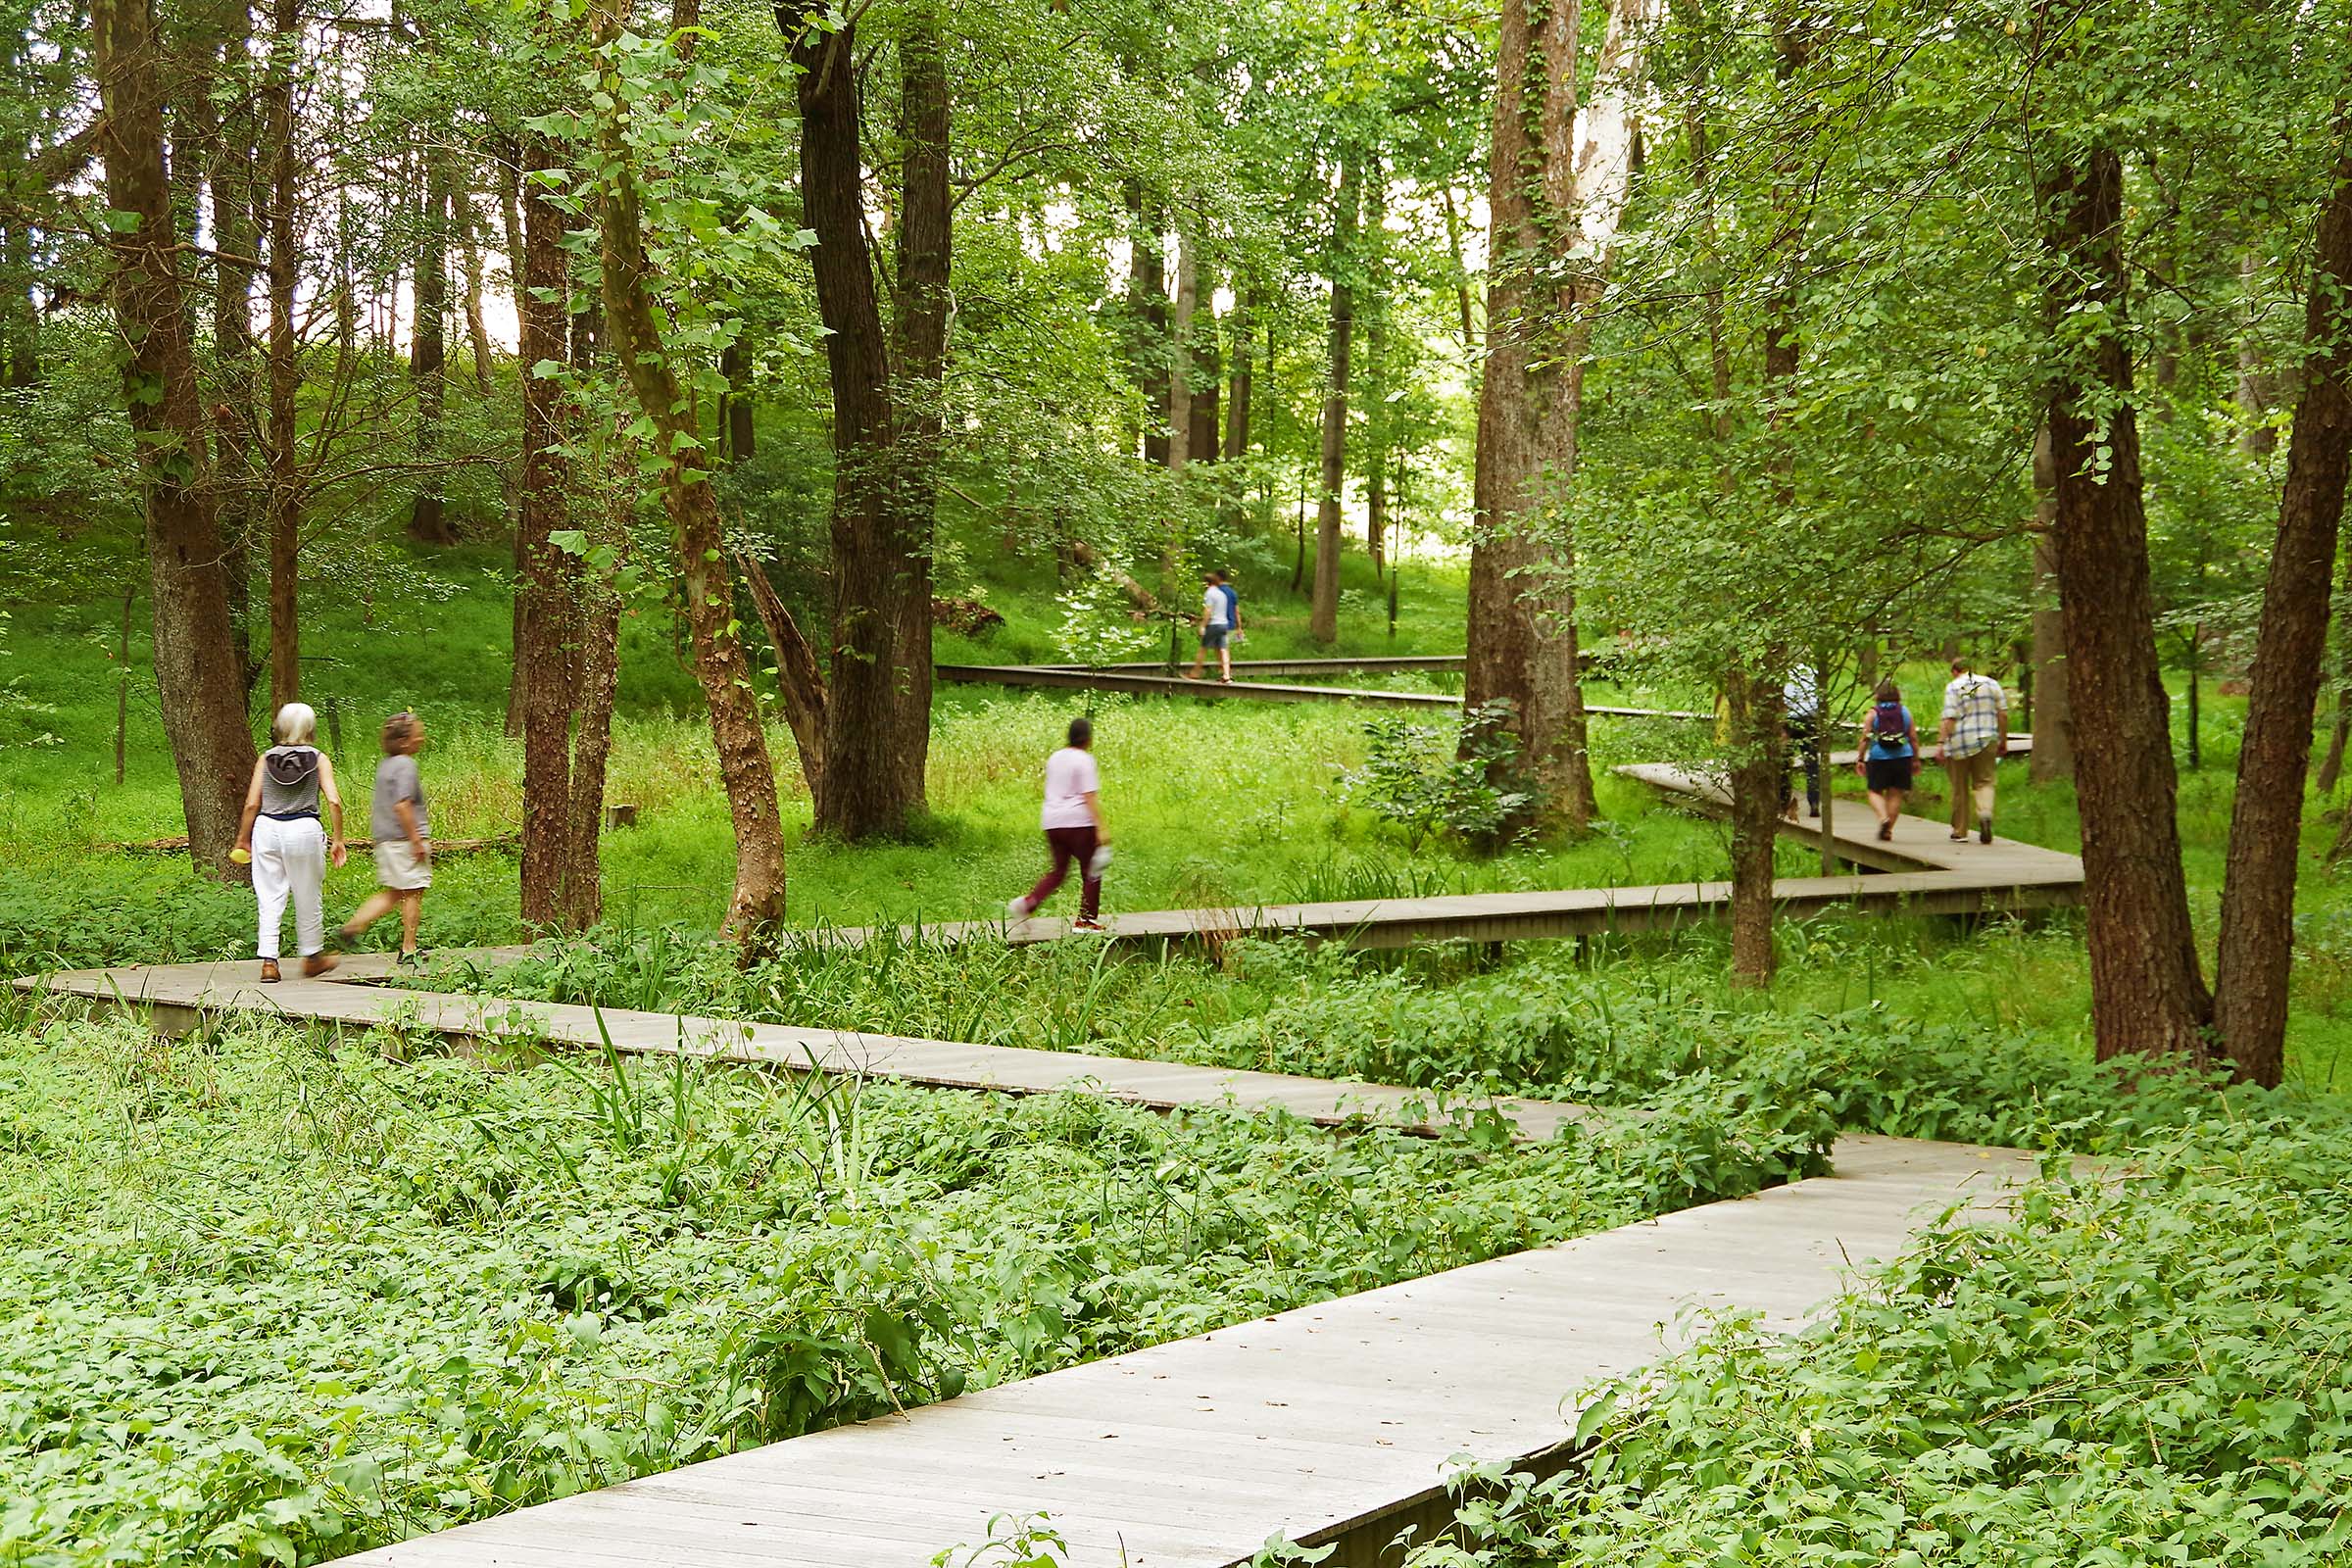 Wooden boardwalk criss crossing through a forest at Glenstone Museum